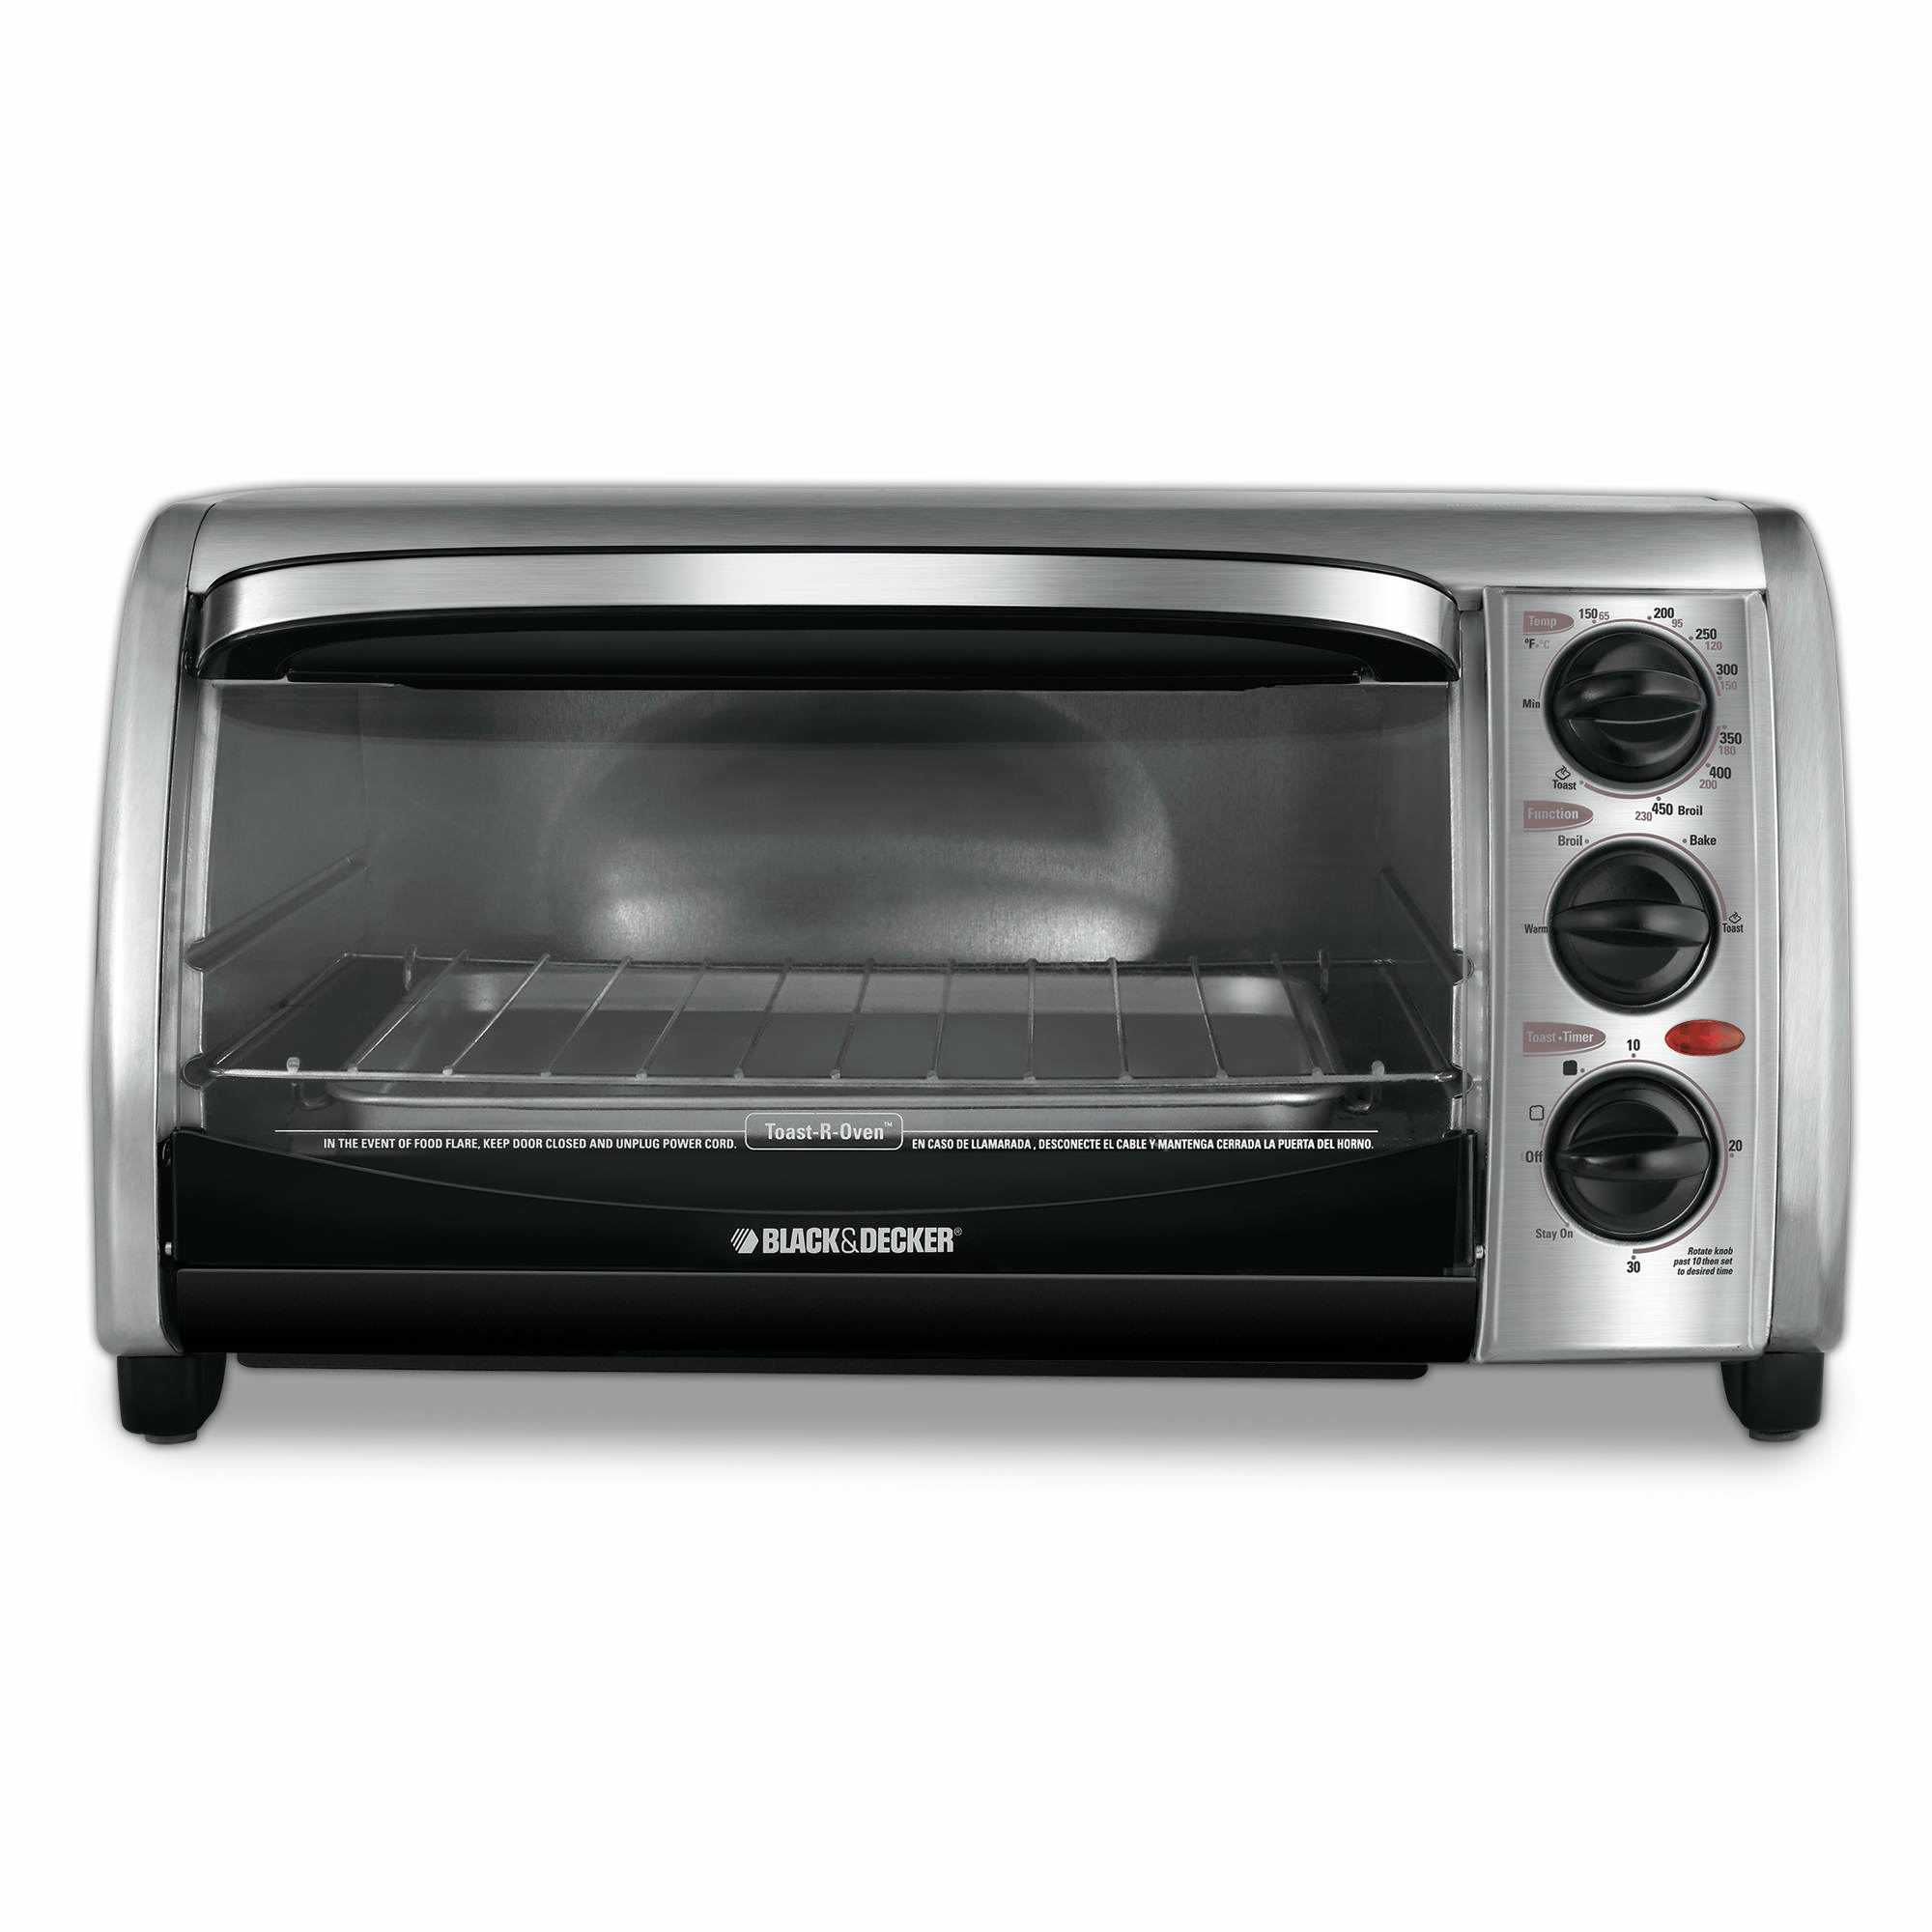 Can you purchase a Black and Decker toaster oven online?